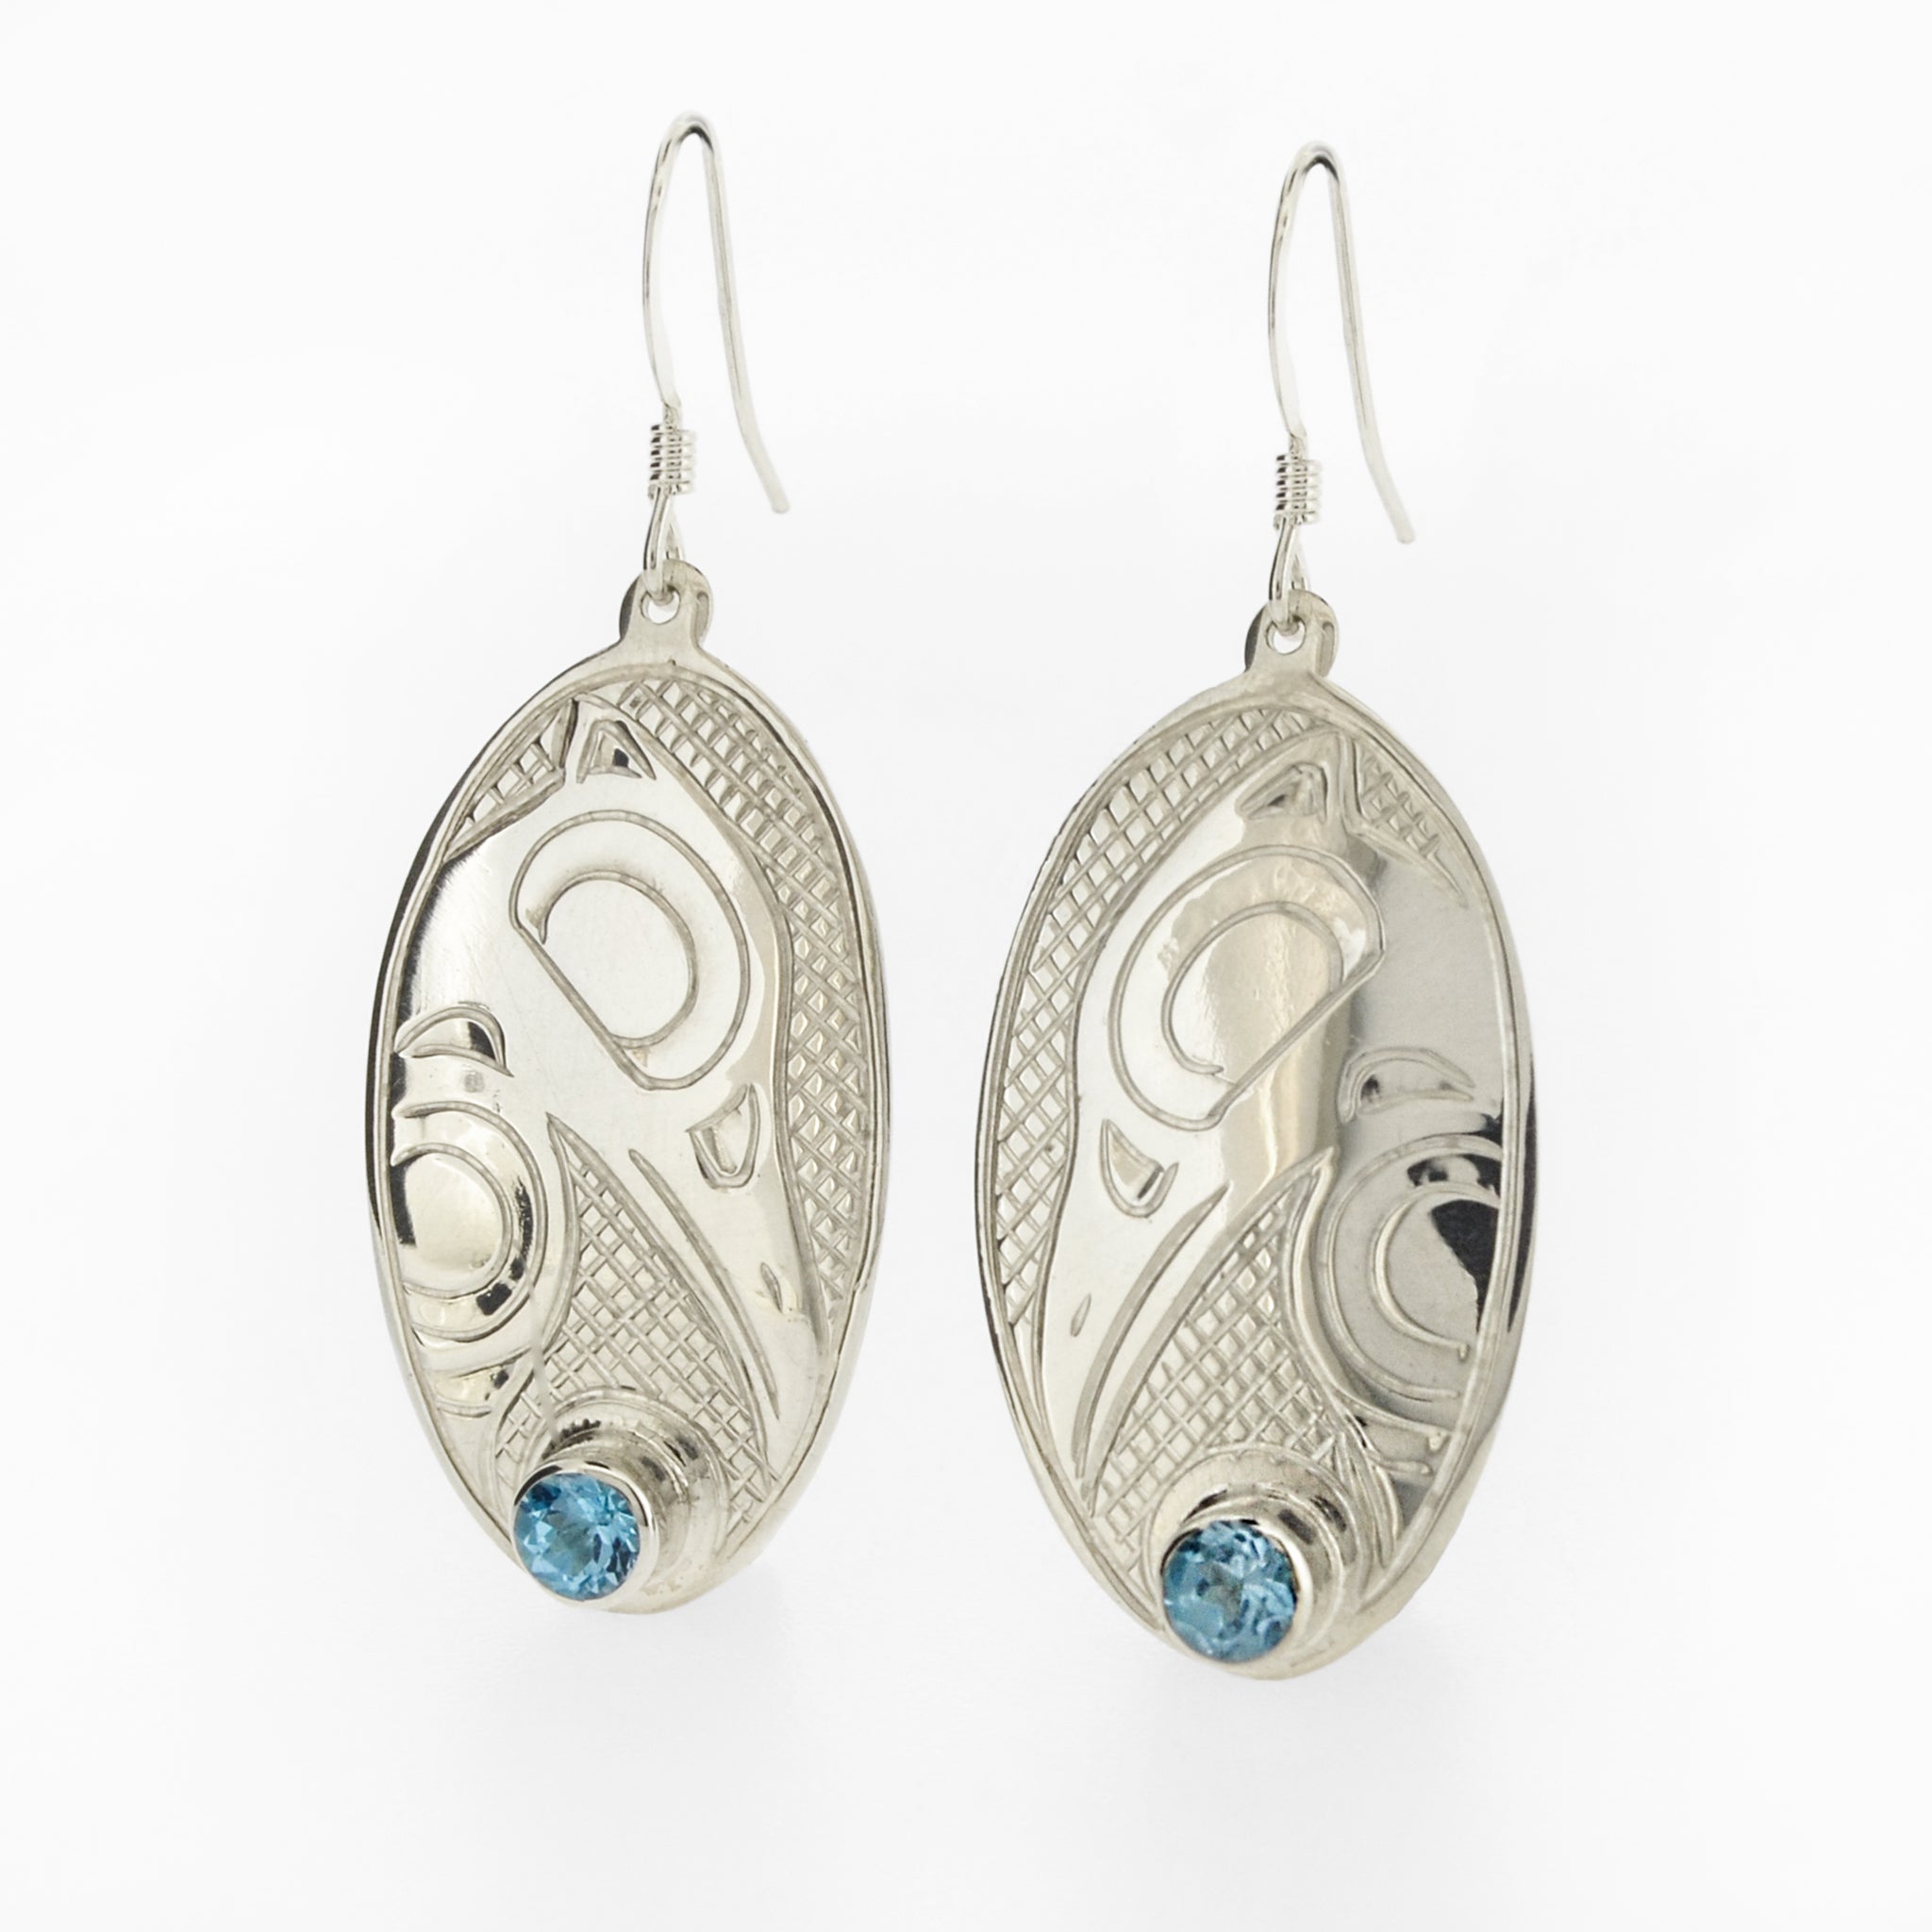 Sterling Silver Earrings with Stone by Justin Rivard, Cree